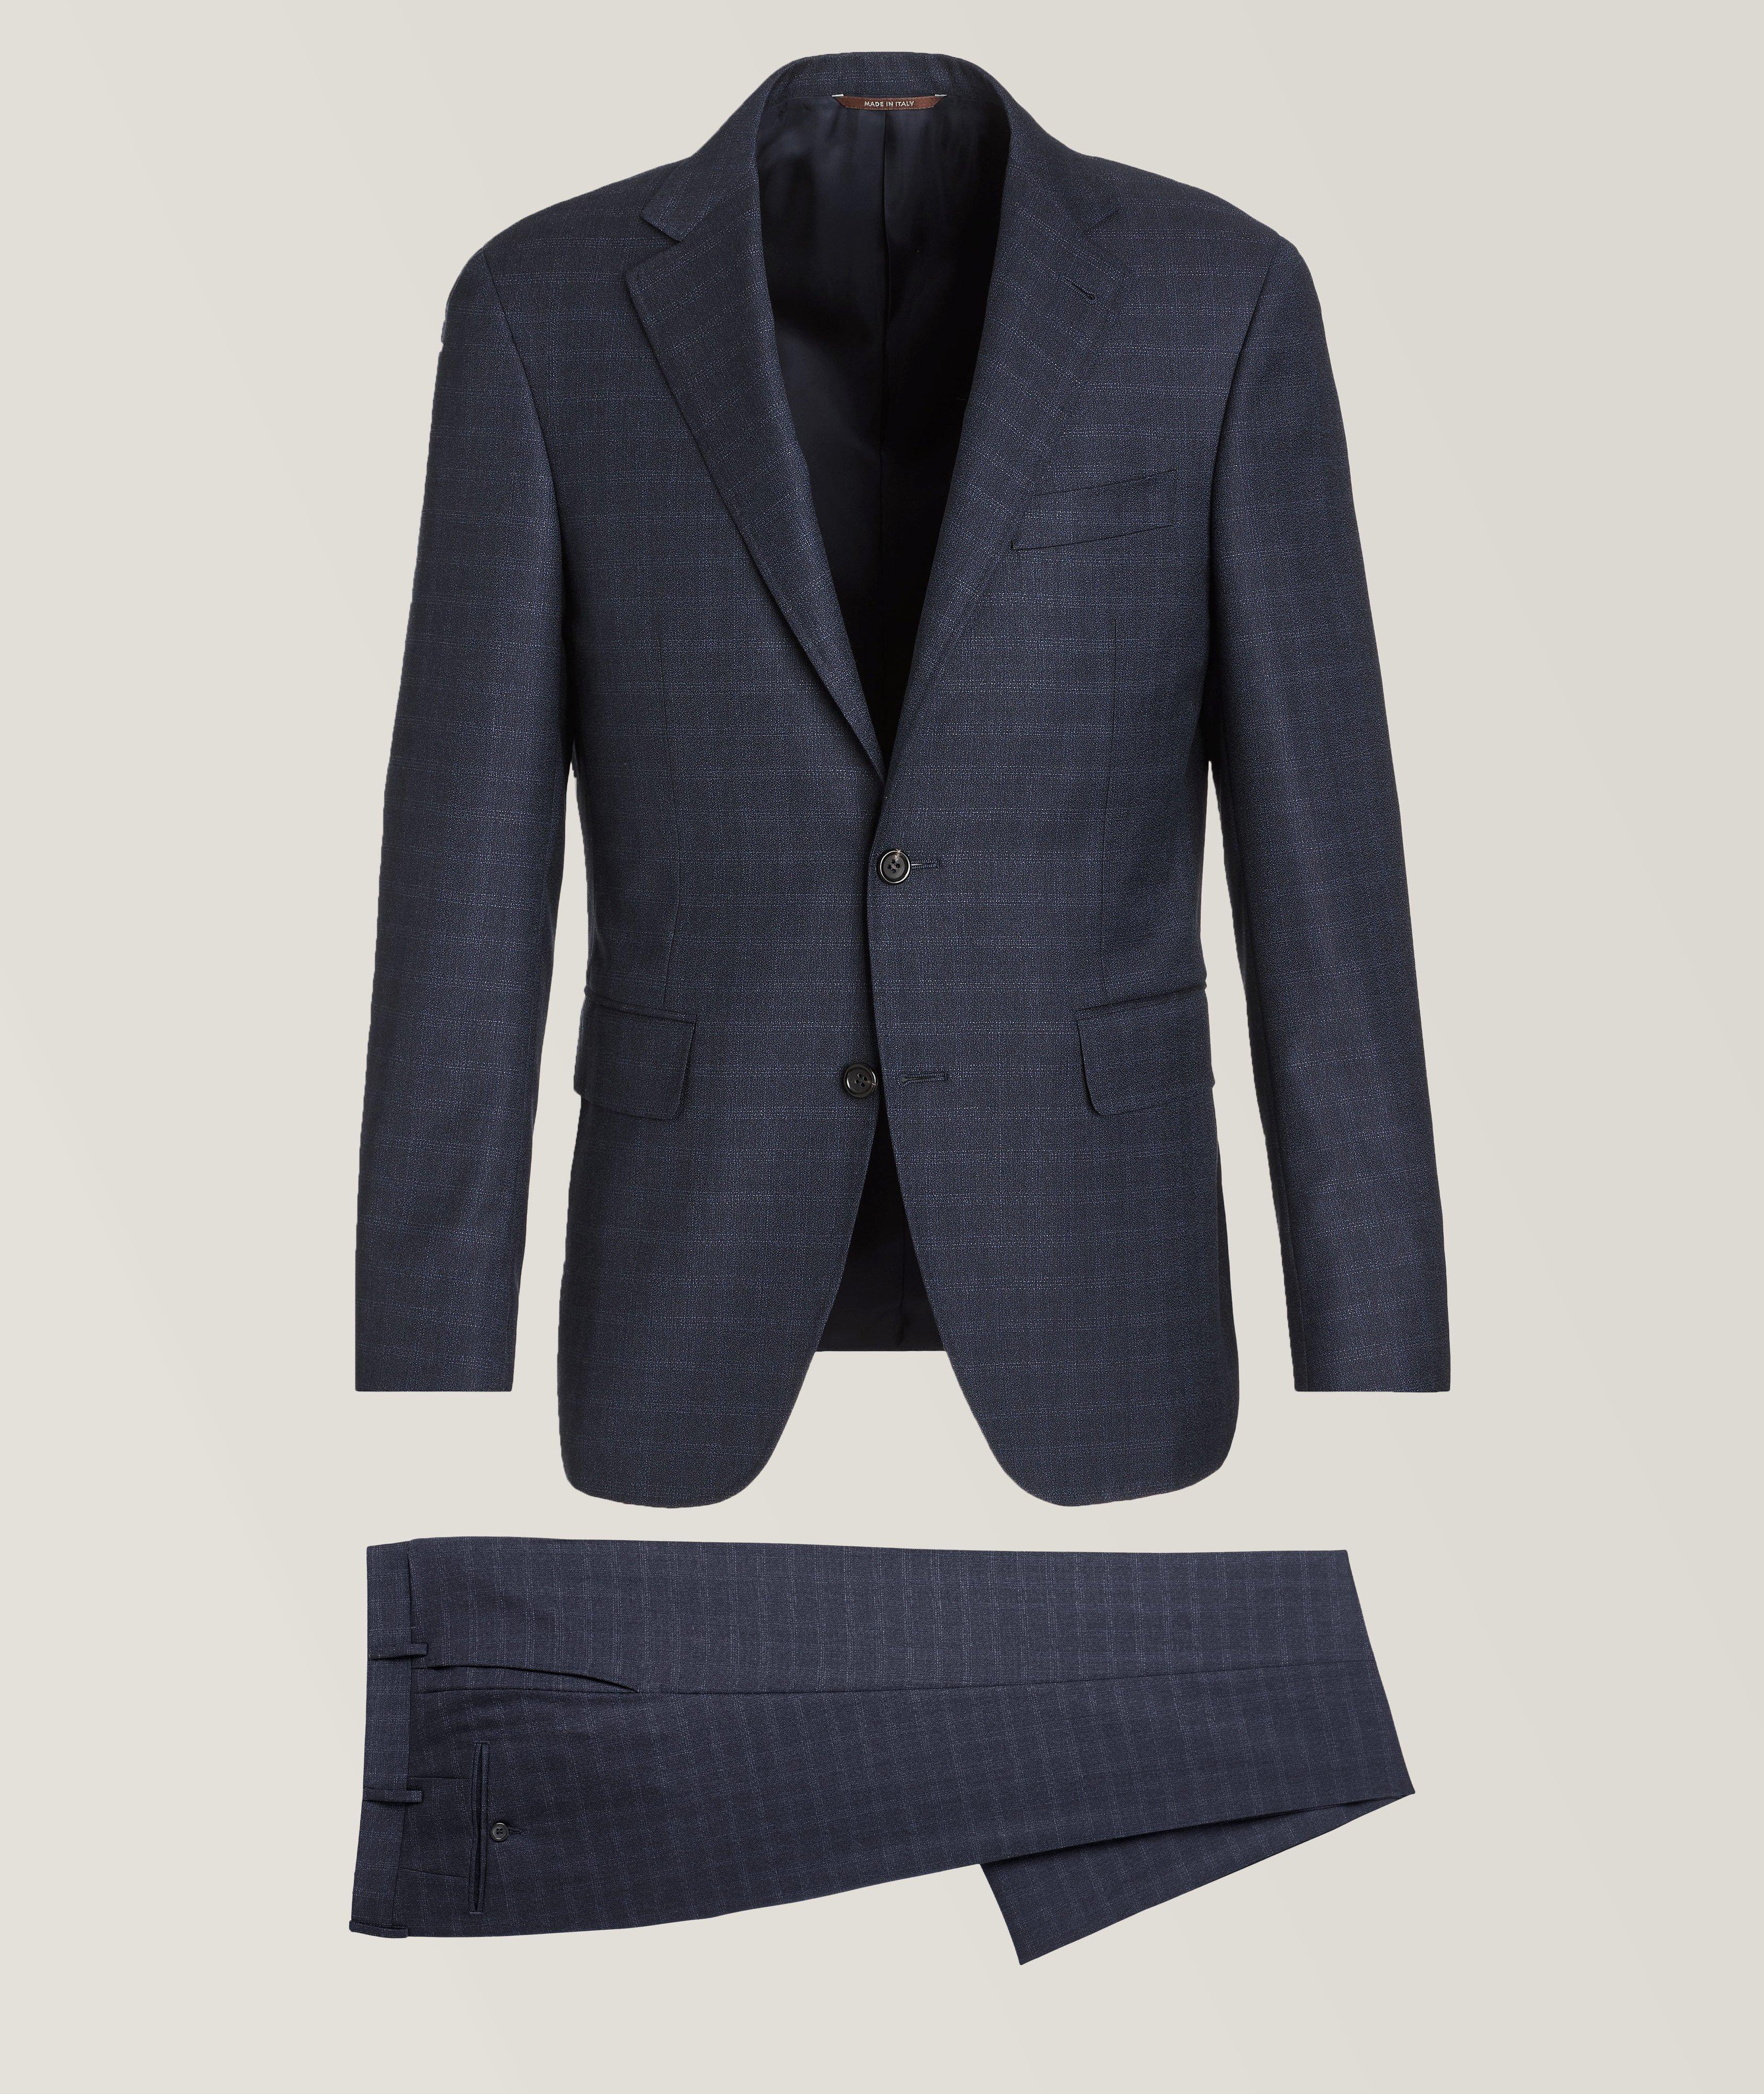 Kei Graphic Check Pattern Wool Suit image 0